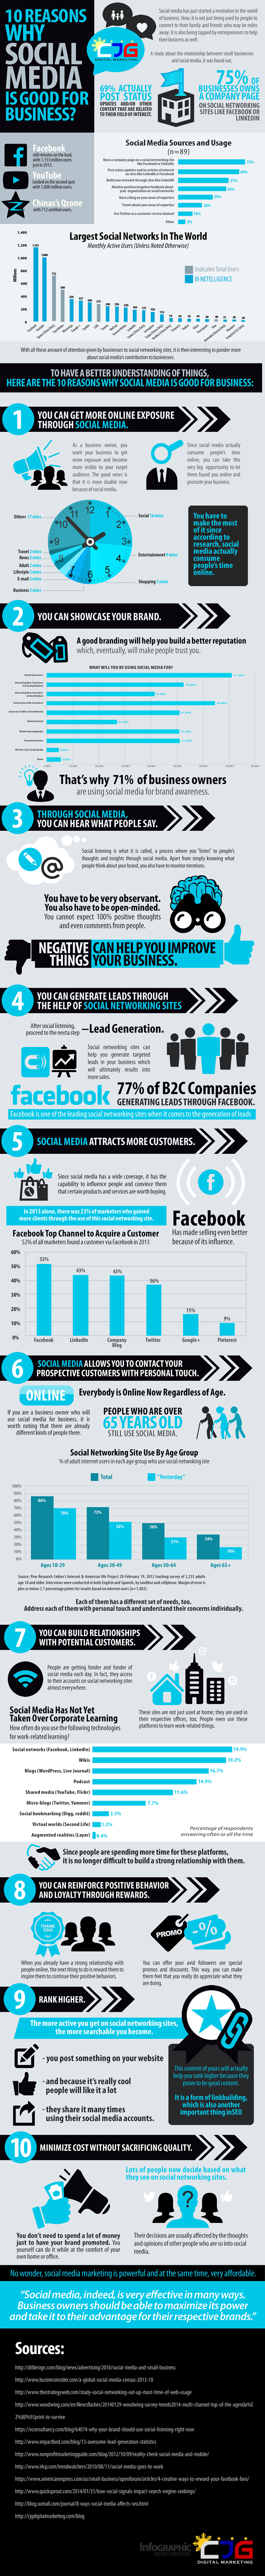 Infographie 146 - 10-Reasons-Why-Social-Media-is-Good-for-Business